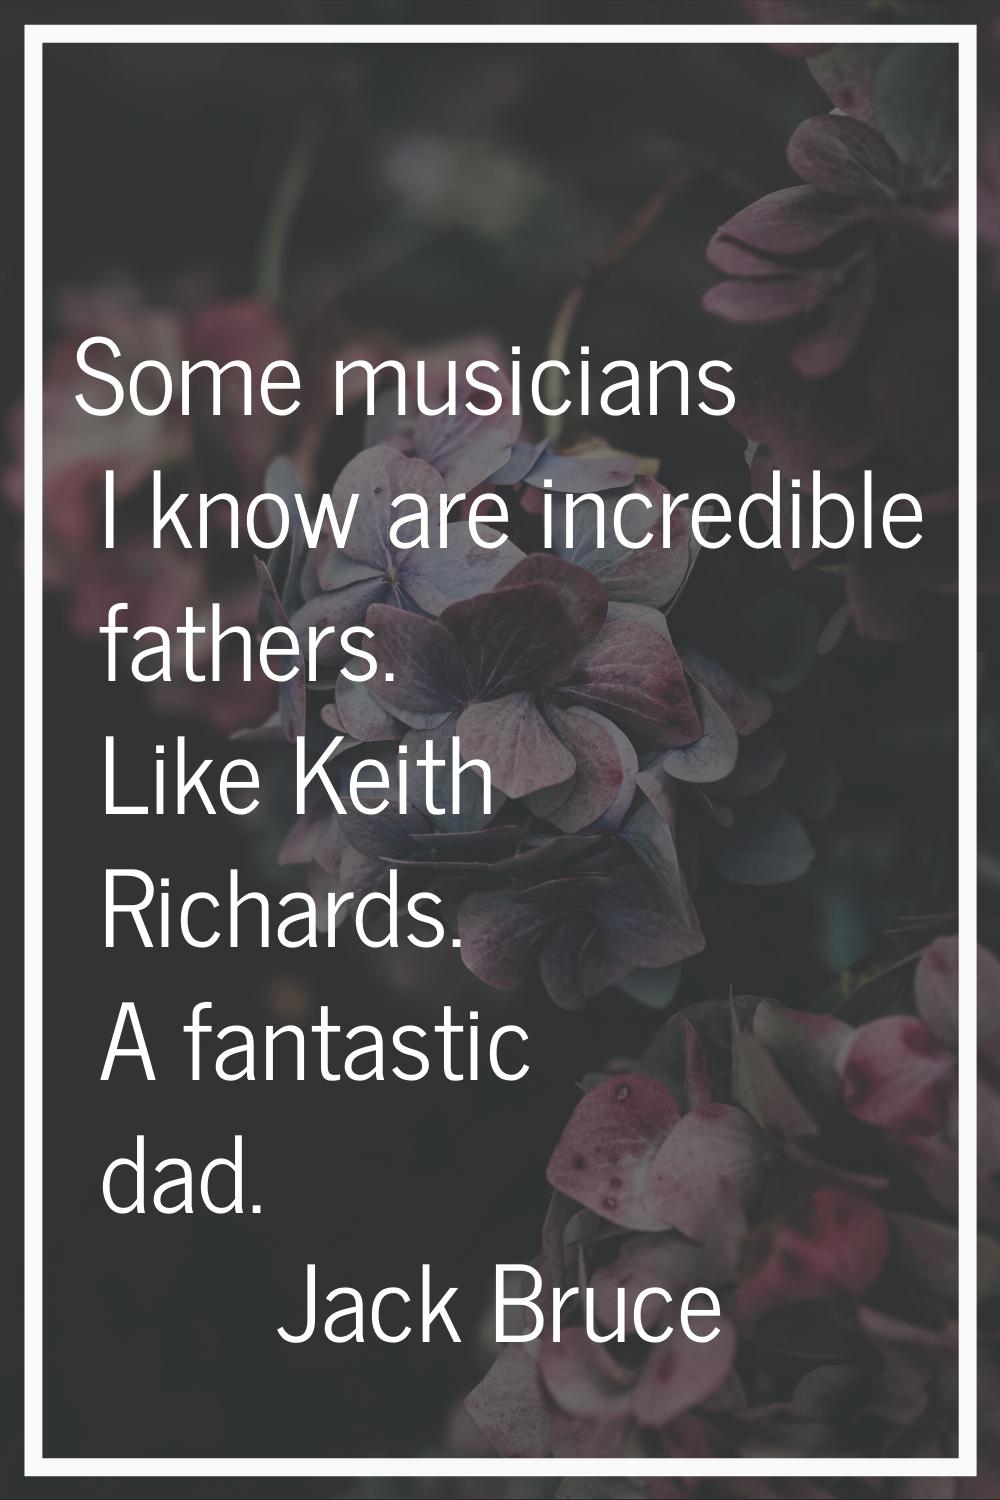 Some musicians I know are incredible fathers. Like Keith Richards. A fantastic dad.